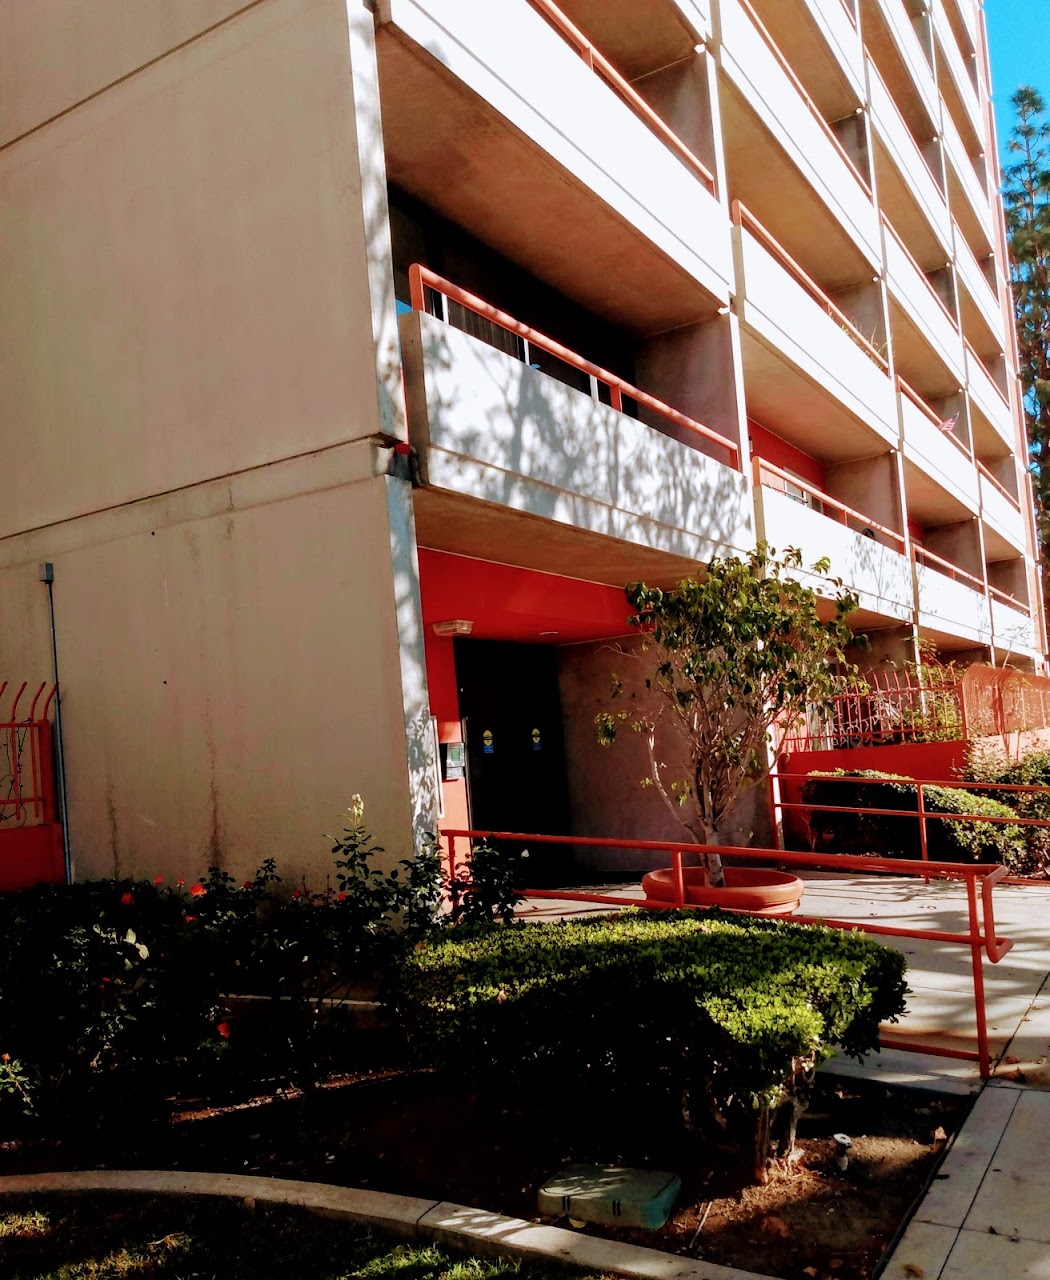 Photo of FLOWER PARK PLAZA. Affordable housing located at 901 W FIRST ST SANTA ANA, CA 92703